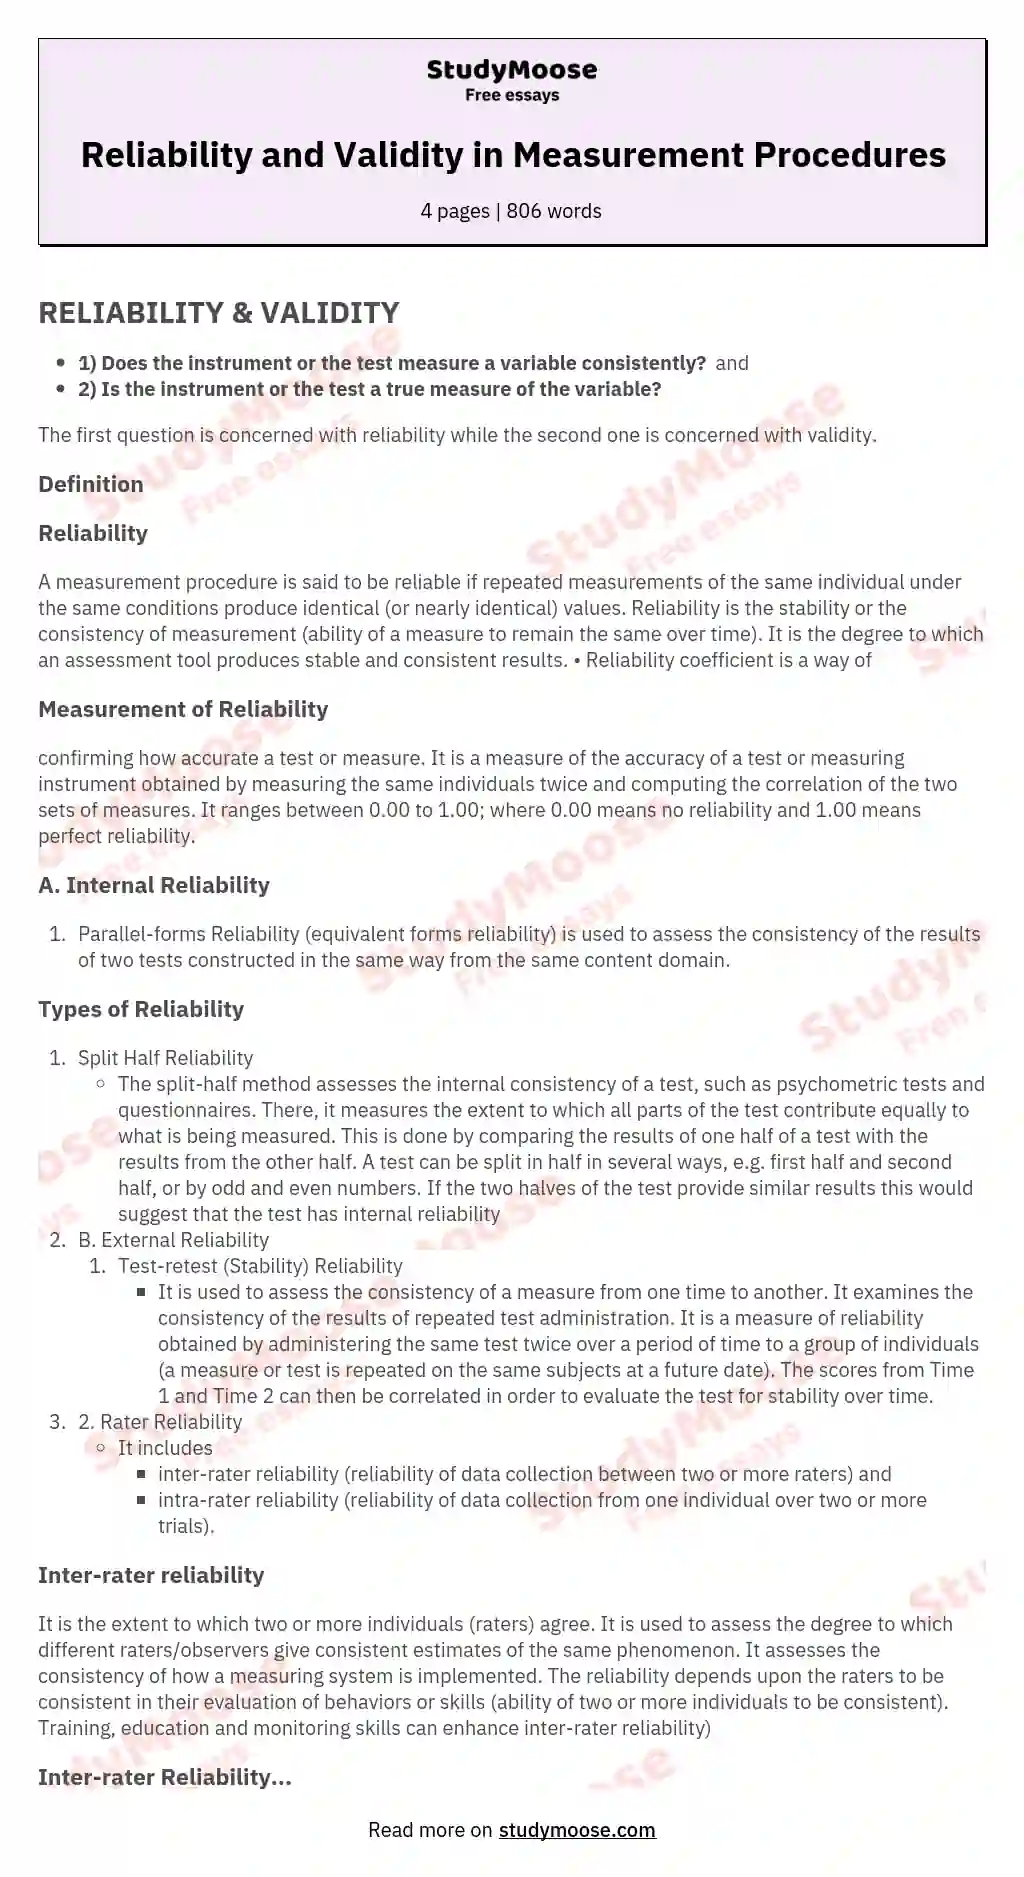 Reliability and Validity in Measurement Procedures essay